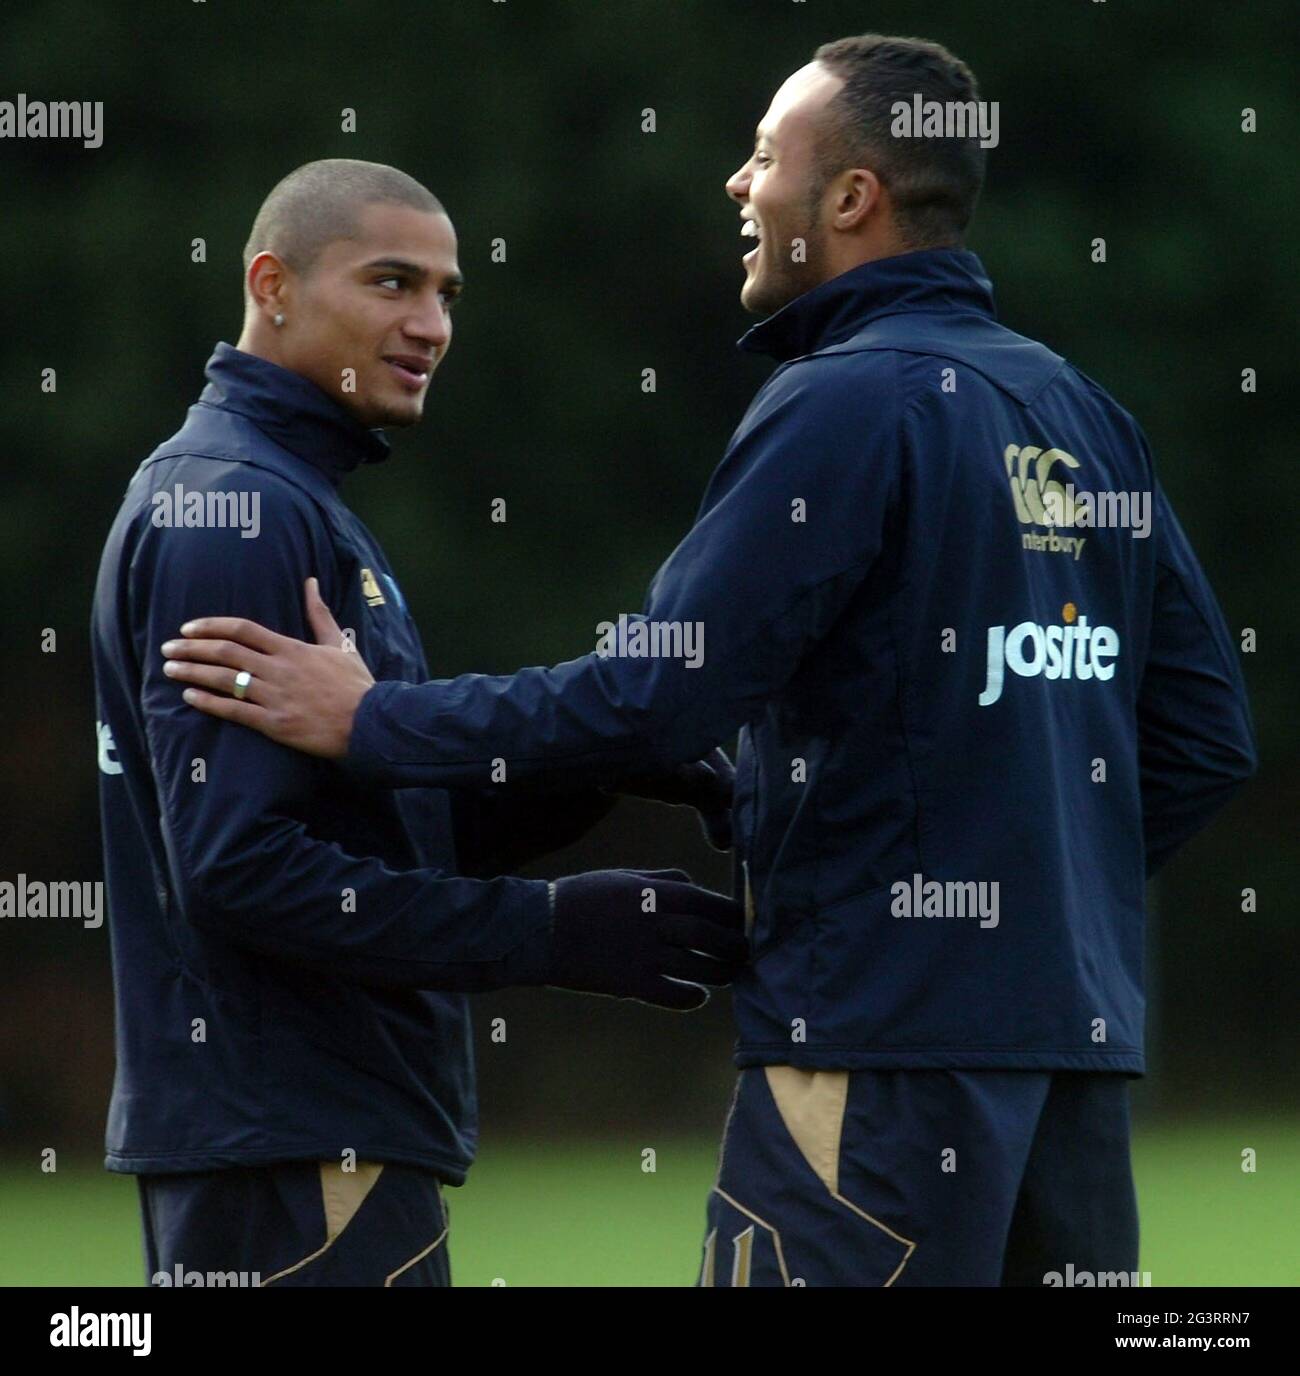 PORTSMOUTH FC, POMPEY, PORTSMOUTH'S PRINCE BOATANG UND YOUNIS KABOUL BEIM TRAINING HEUTE?/GESTERN, FREITAG PIC MIKE WALKER, 2009 Stockfoto